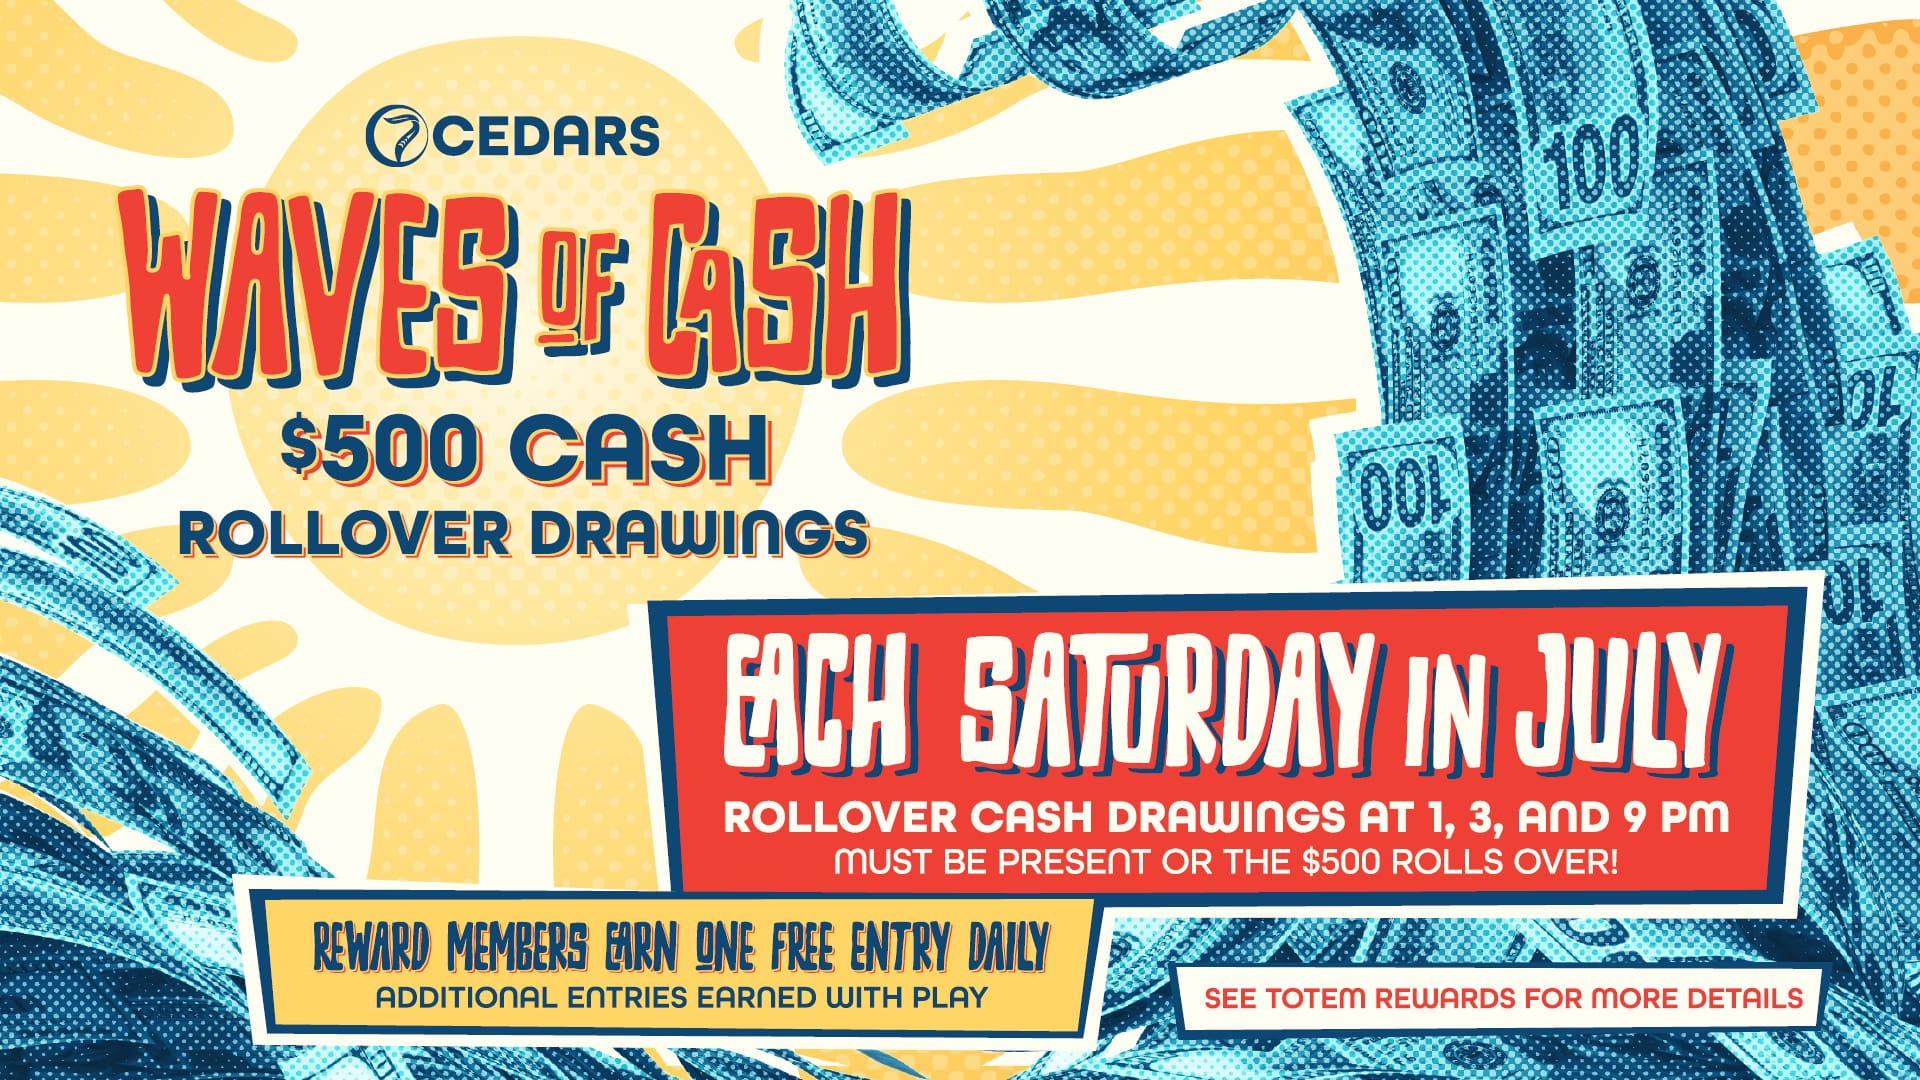 Waves of Cash Rollover Drawings